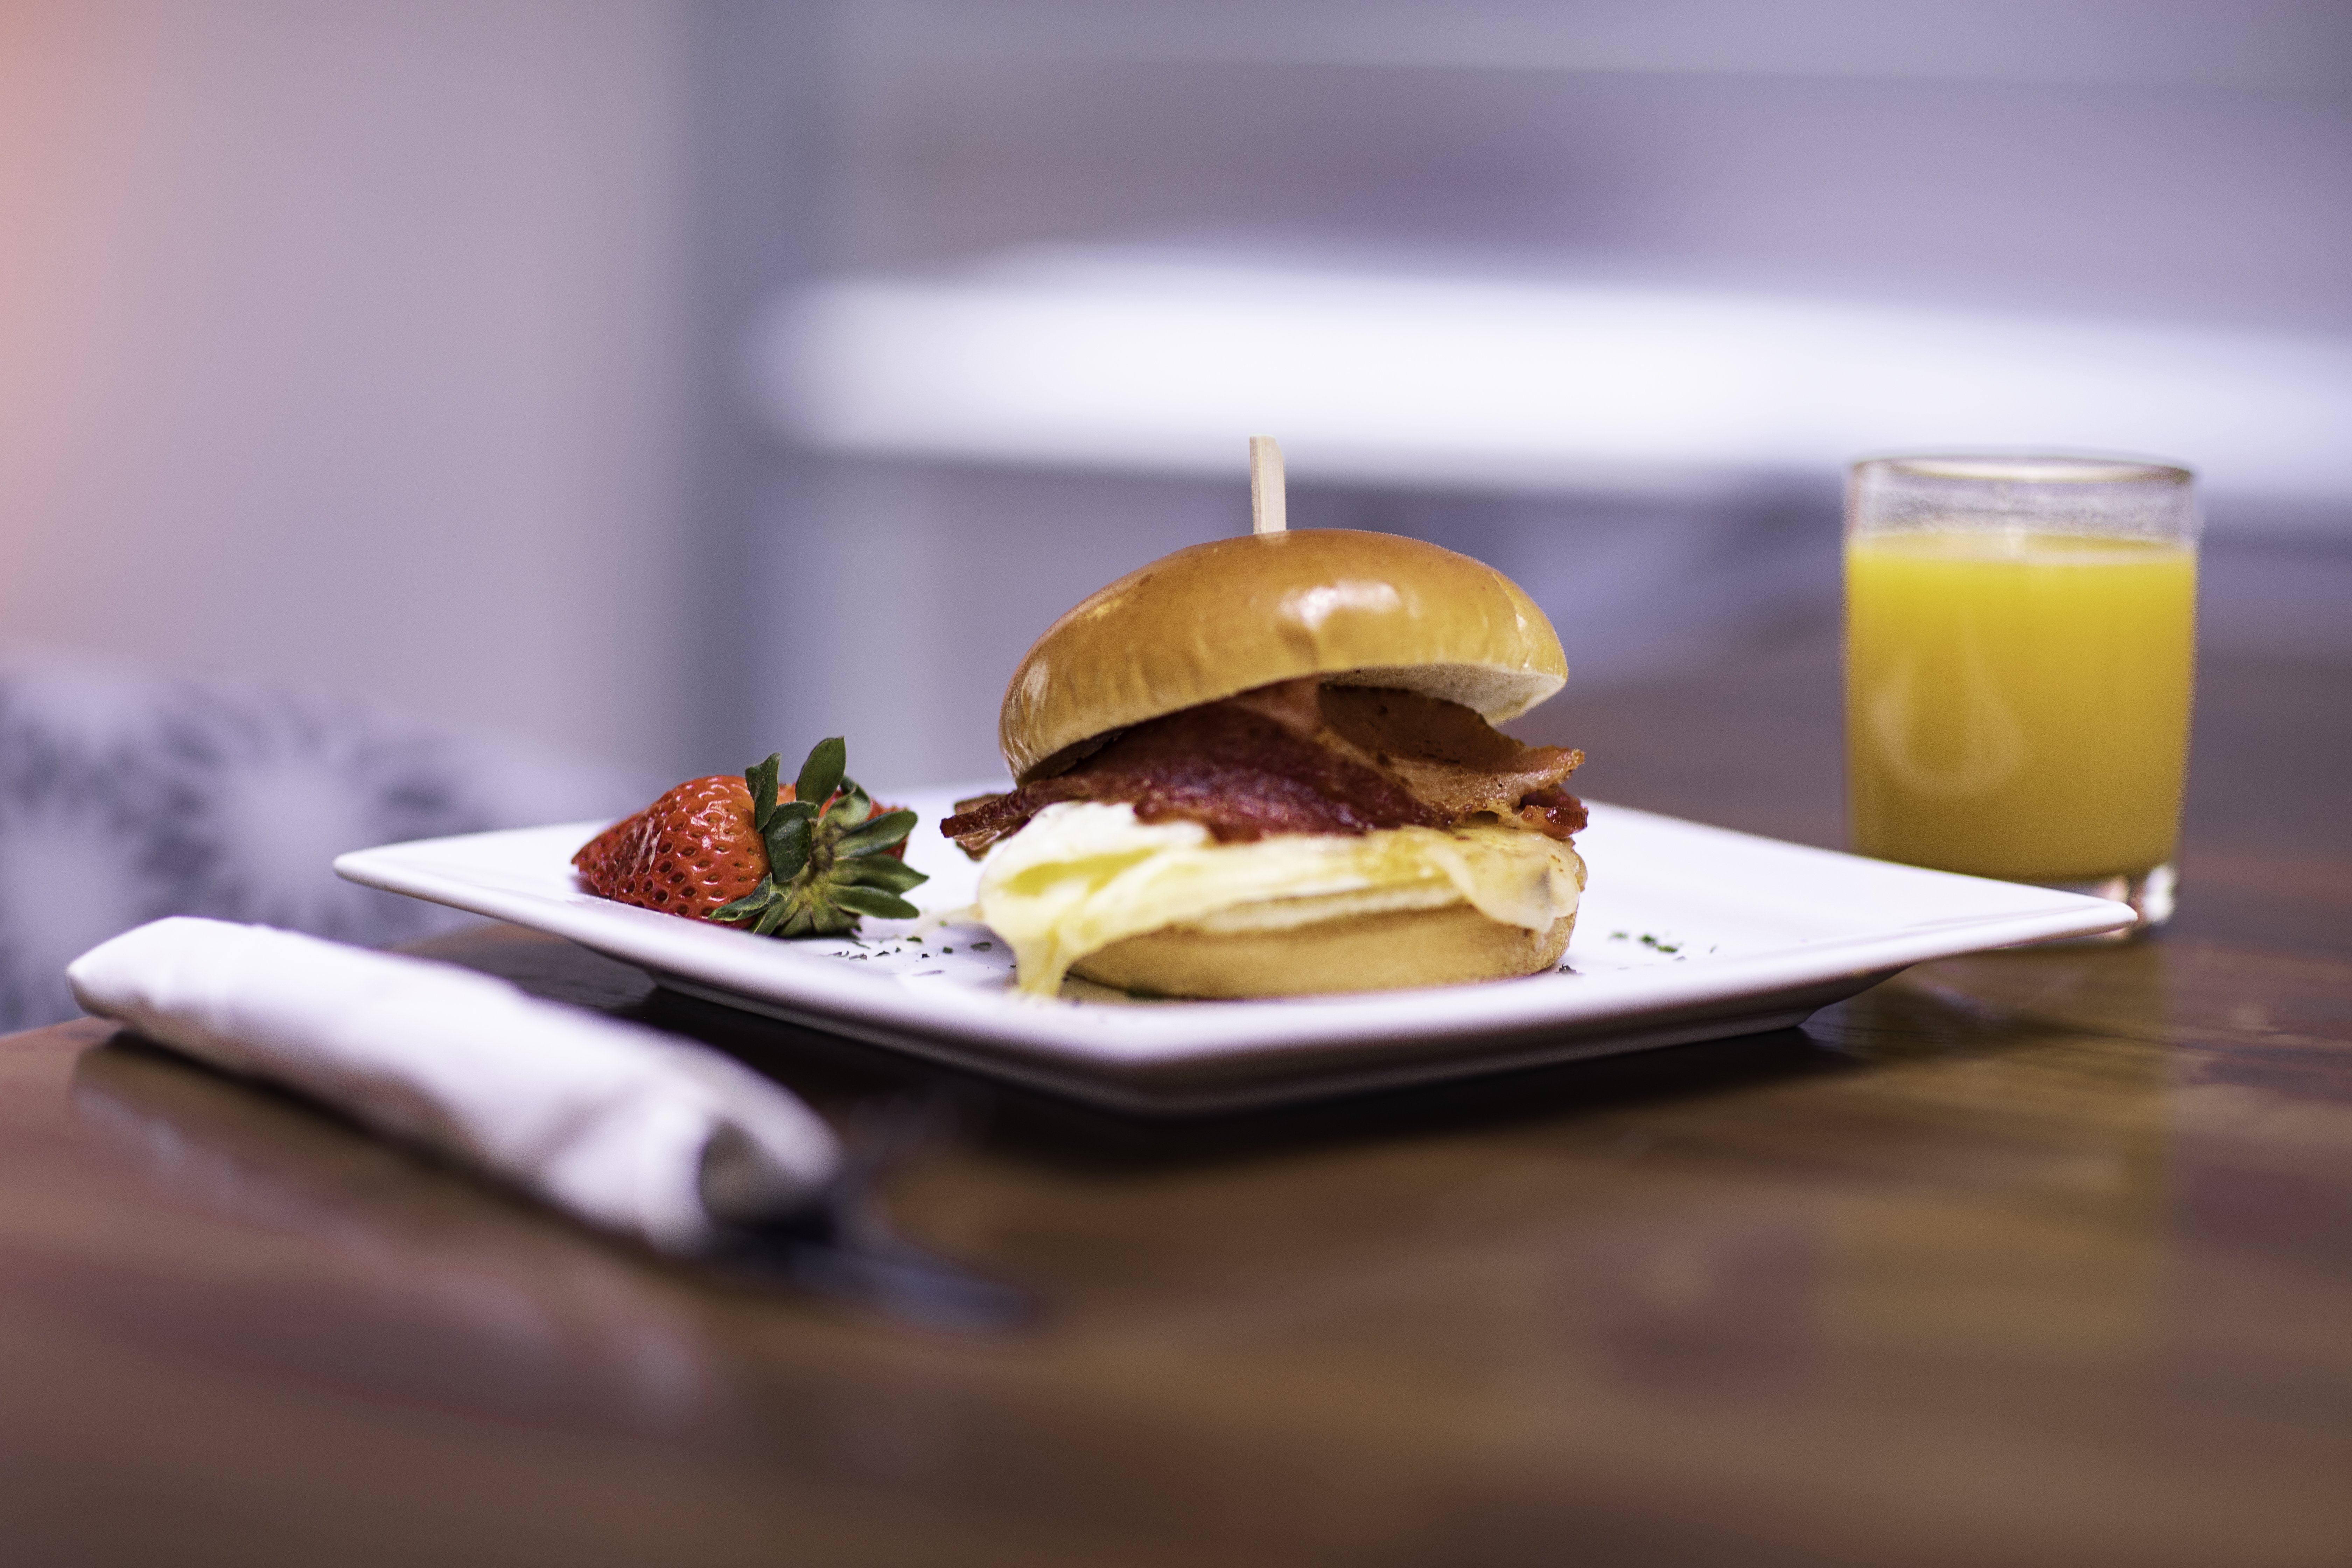 Help start your day right with our classic bacon egg and cheese.